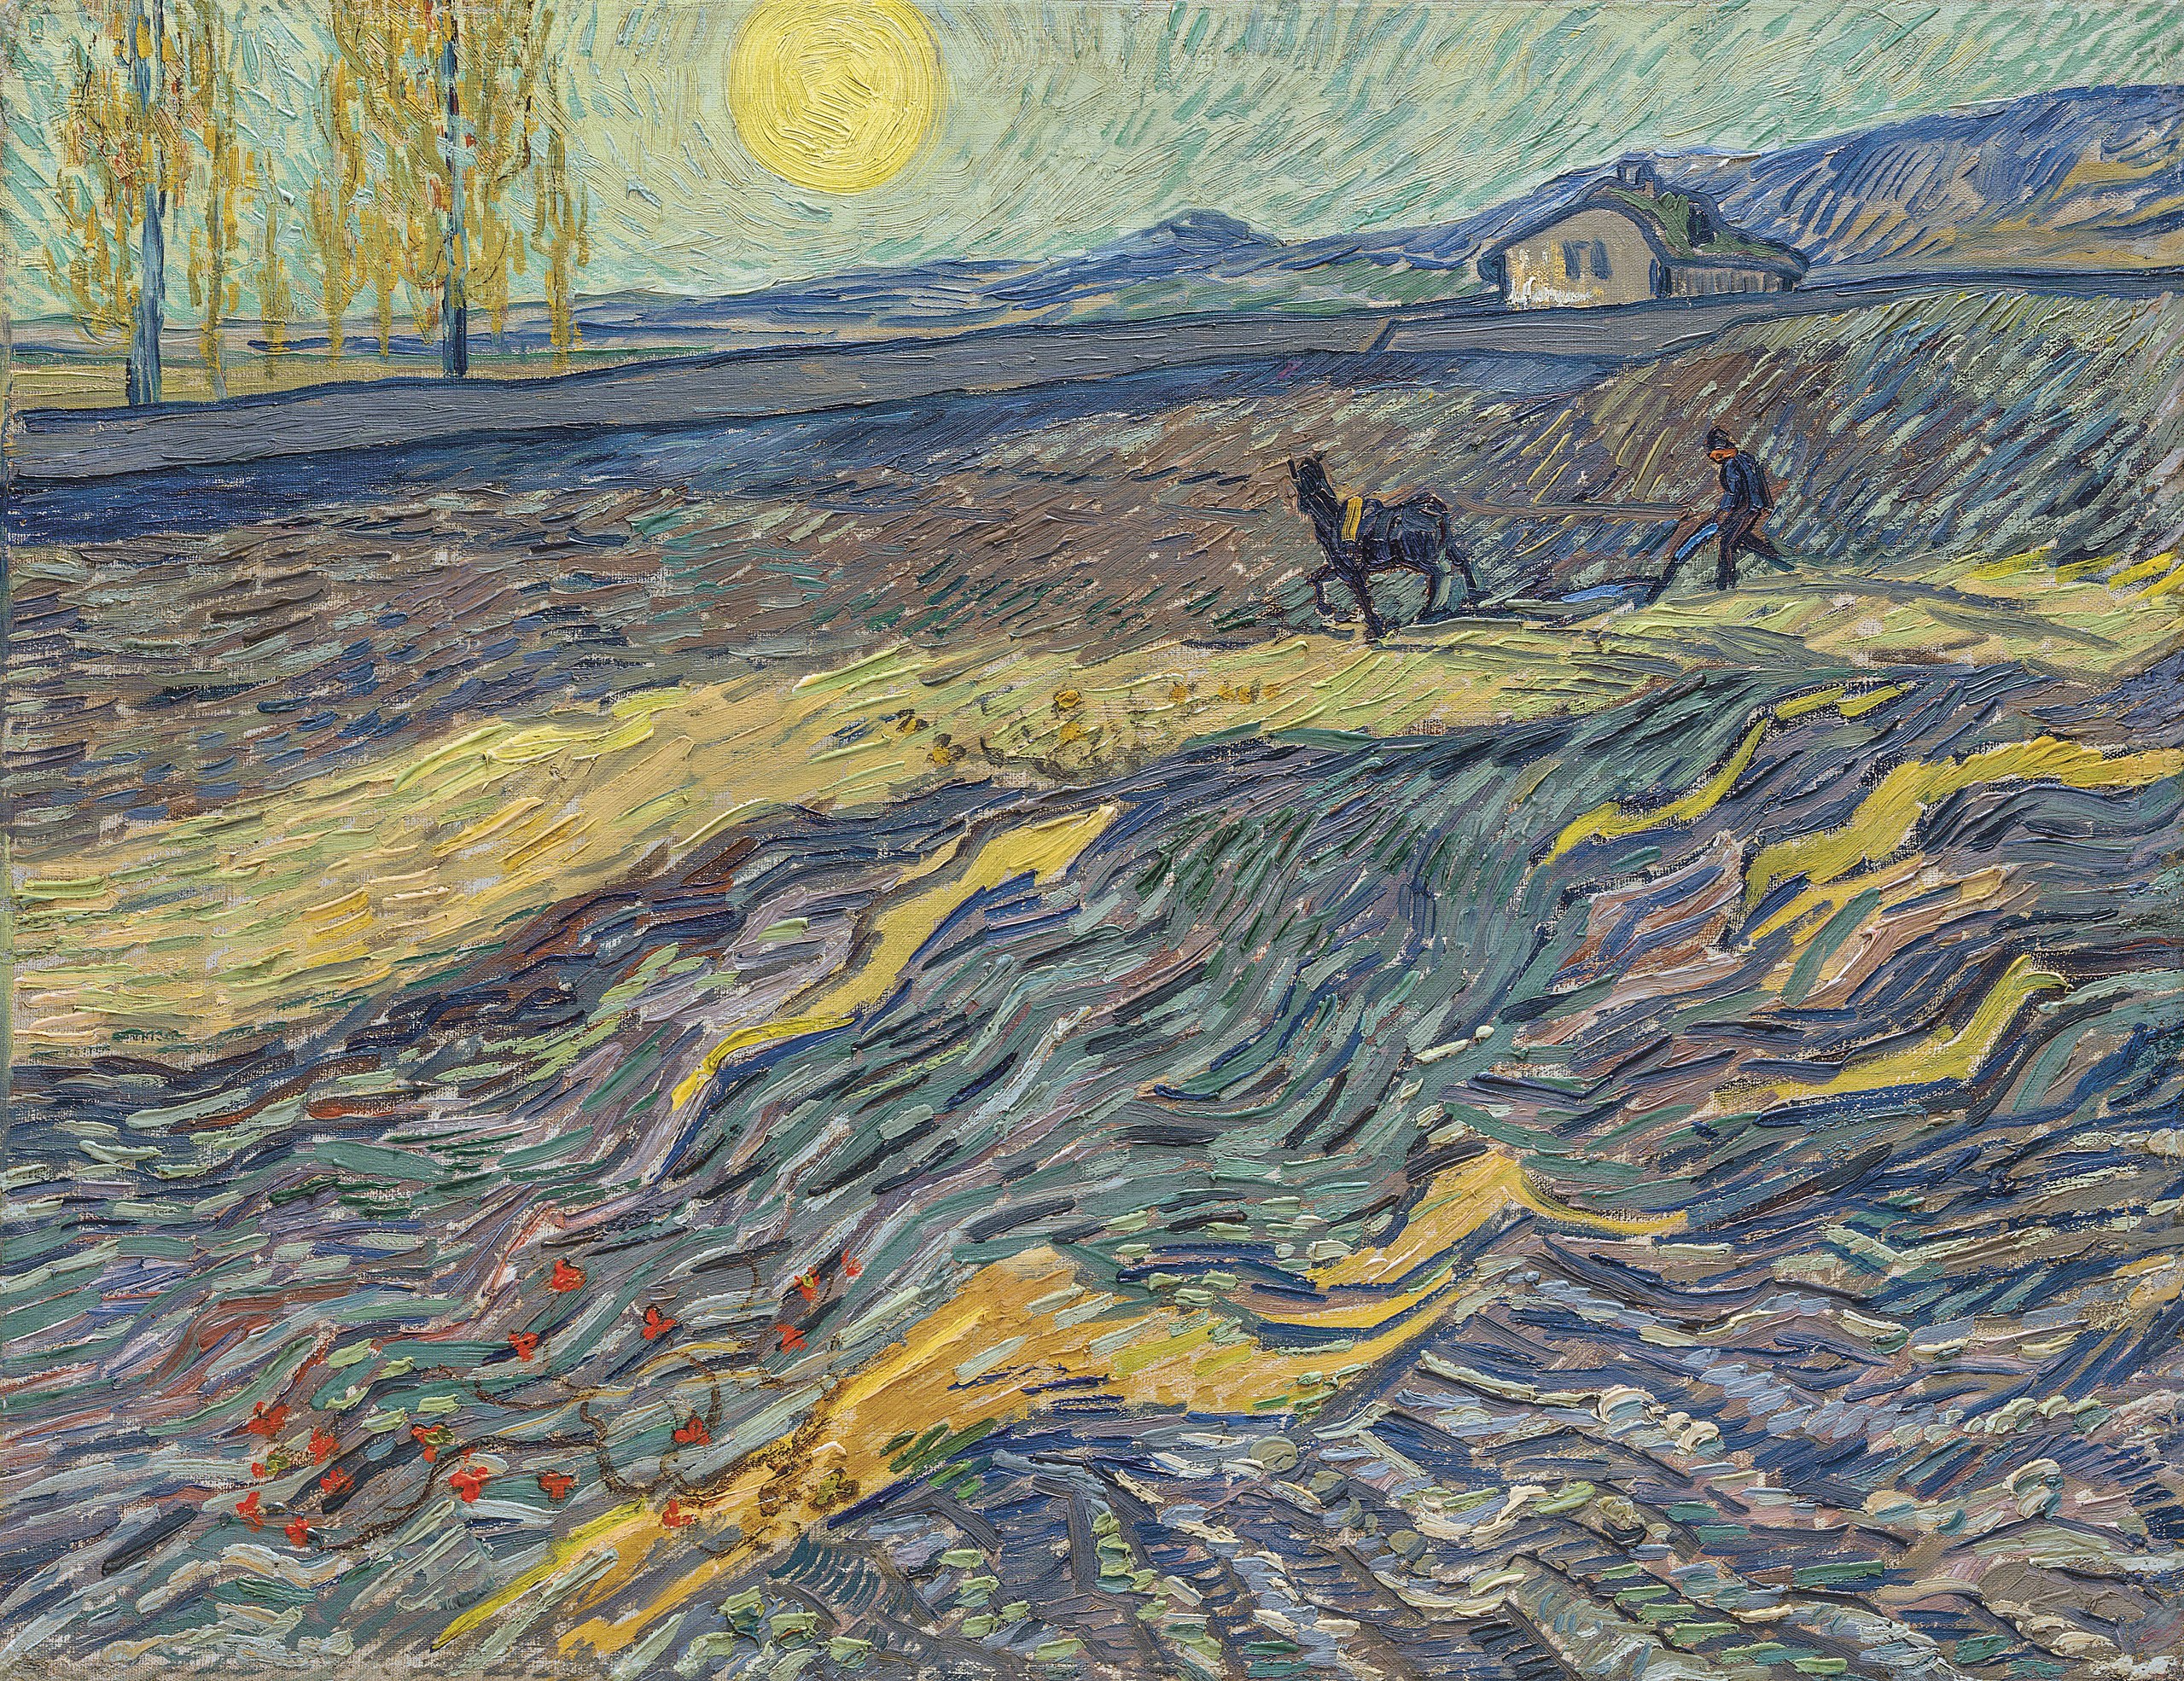 Labourer in a Field by Vincent van Gogh - 1889 - 50.3 x 64.9 cm private collection